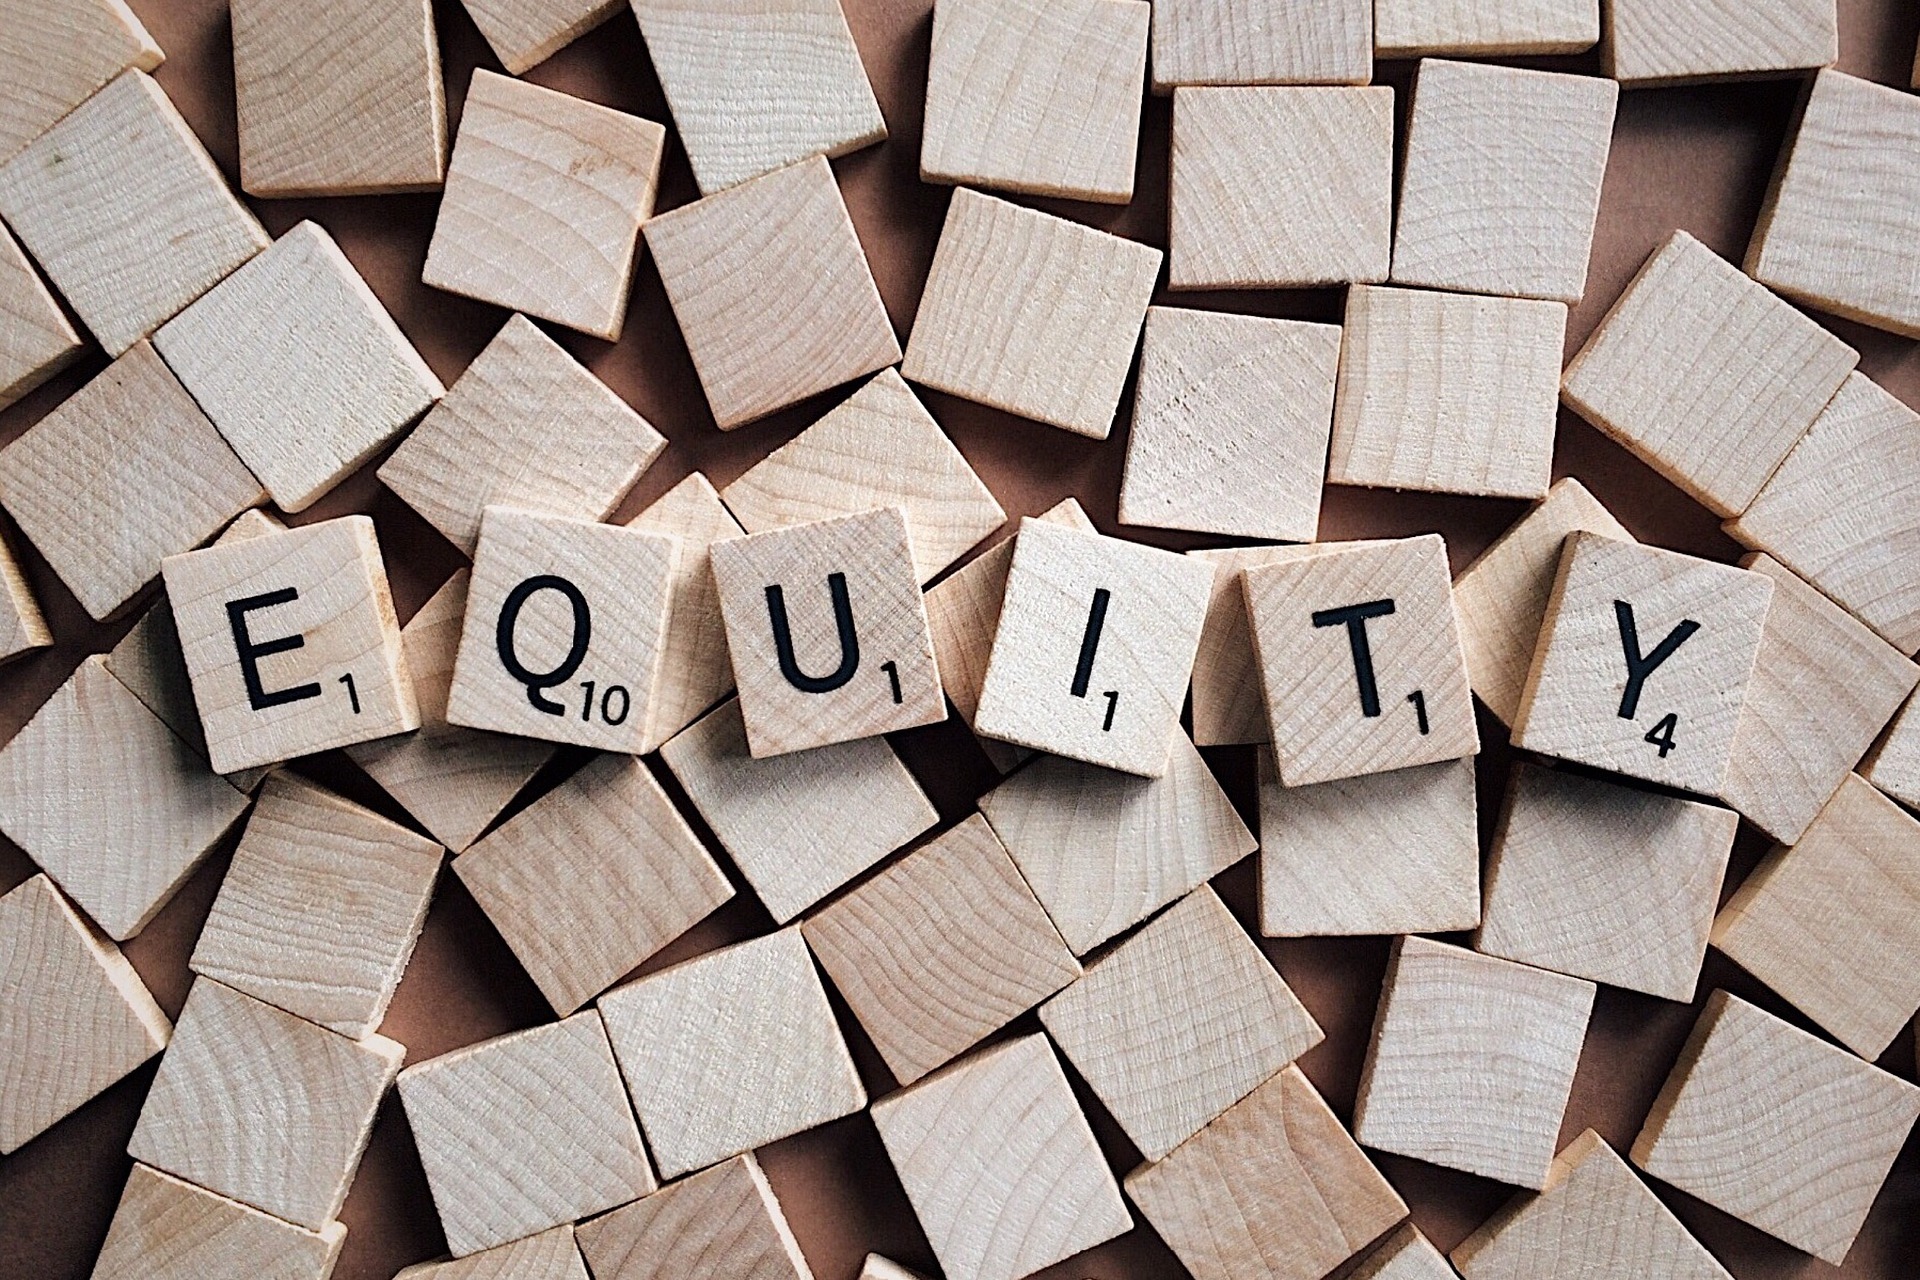 Equity spelled out by boxed letters